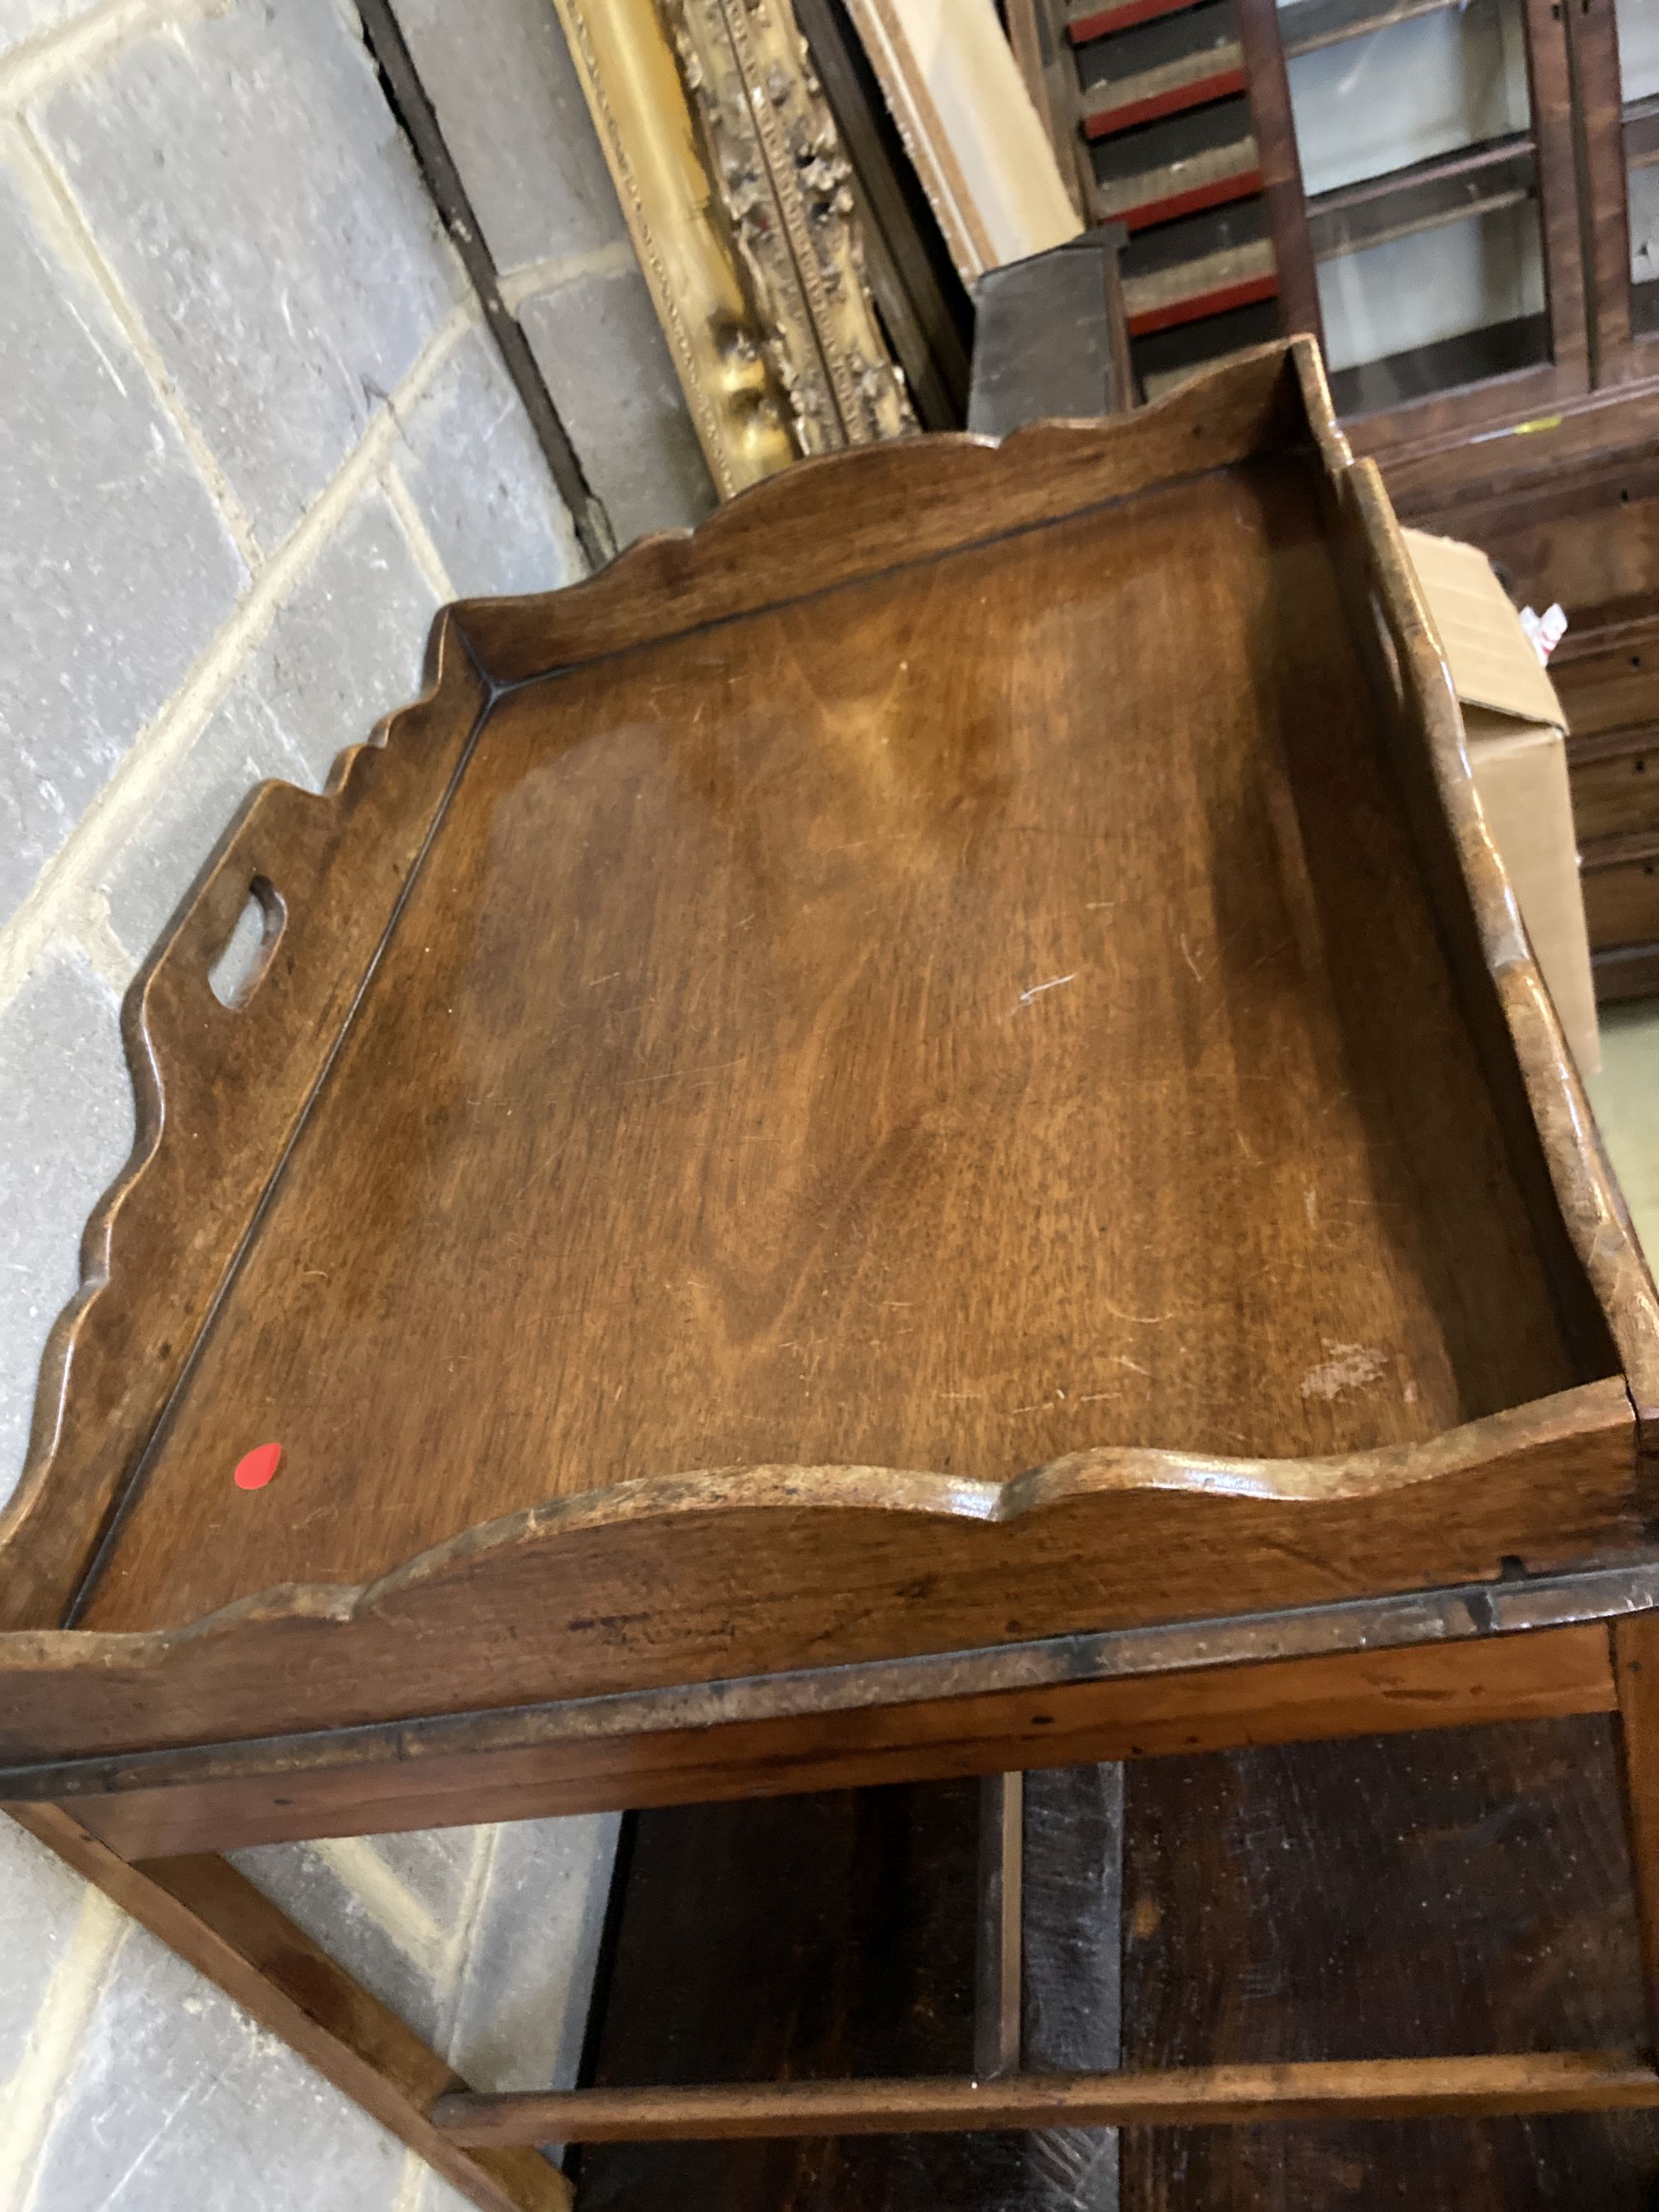 A George III style mahogany tray top table, width 71cm, depth 50cm, height 51cm